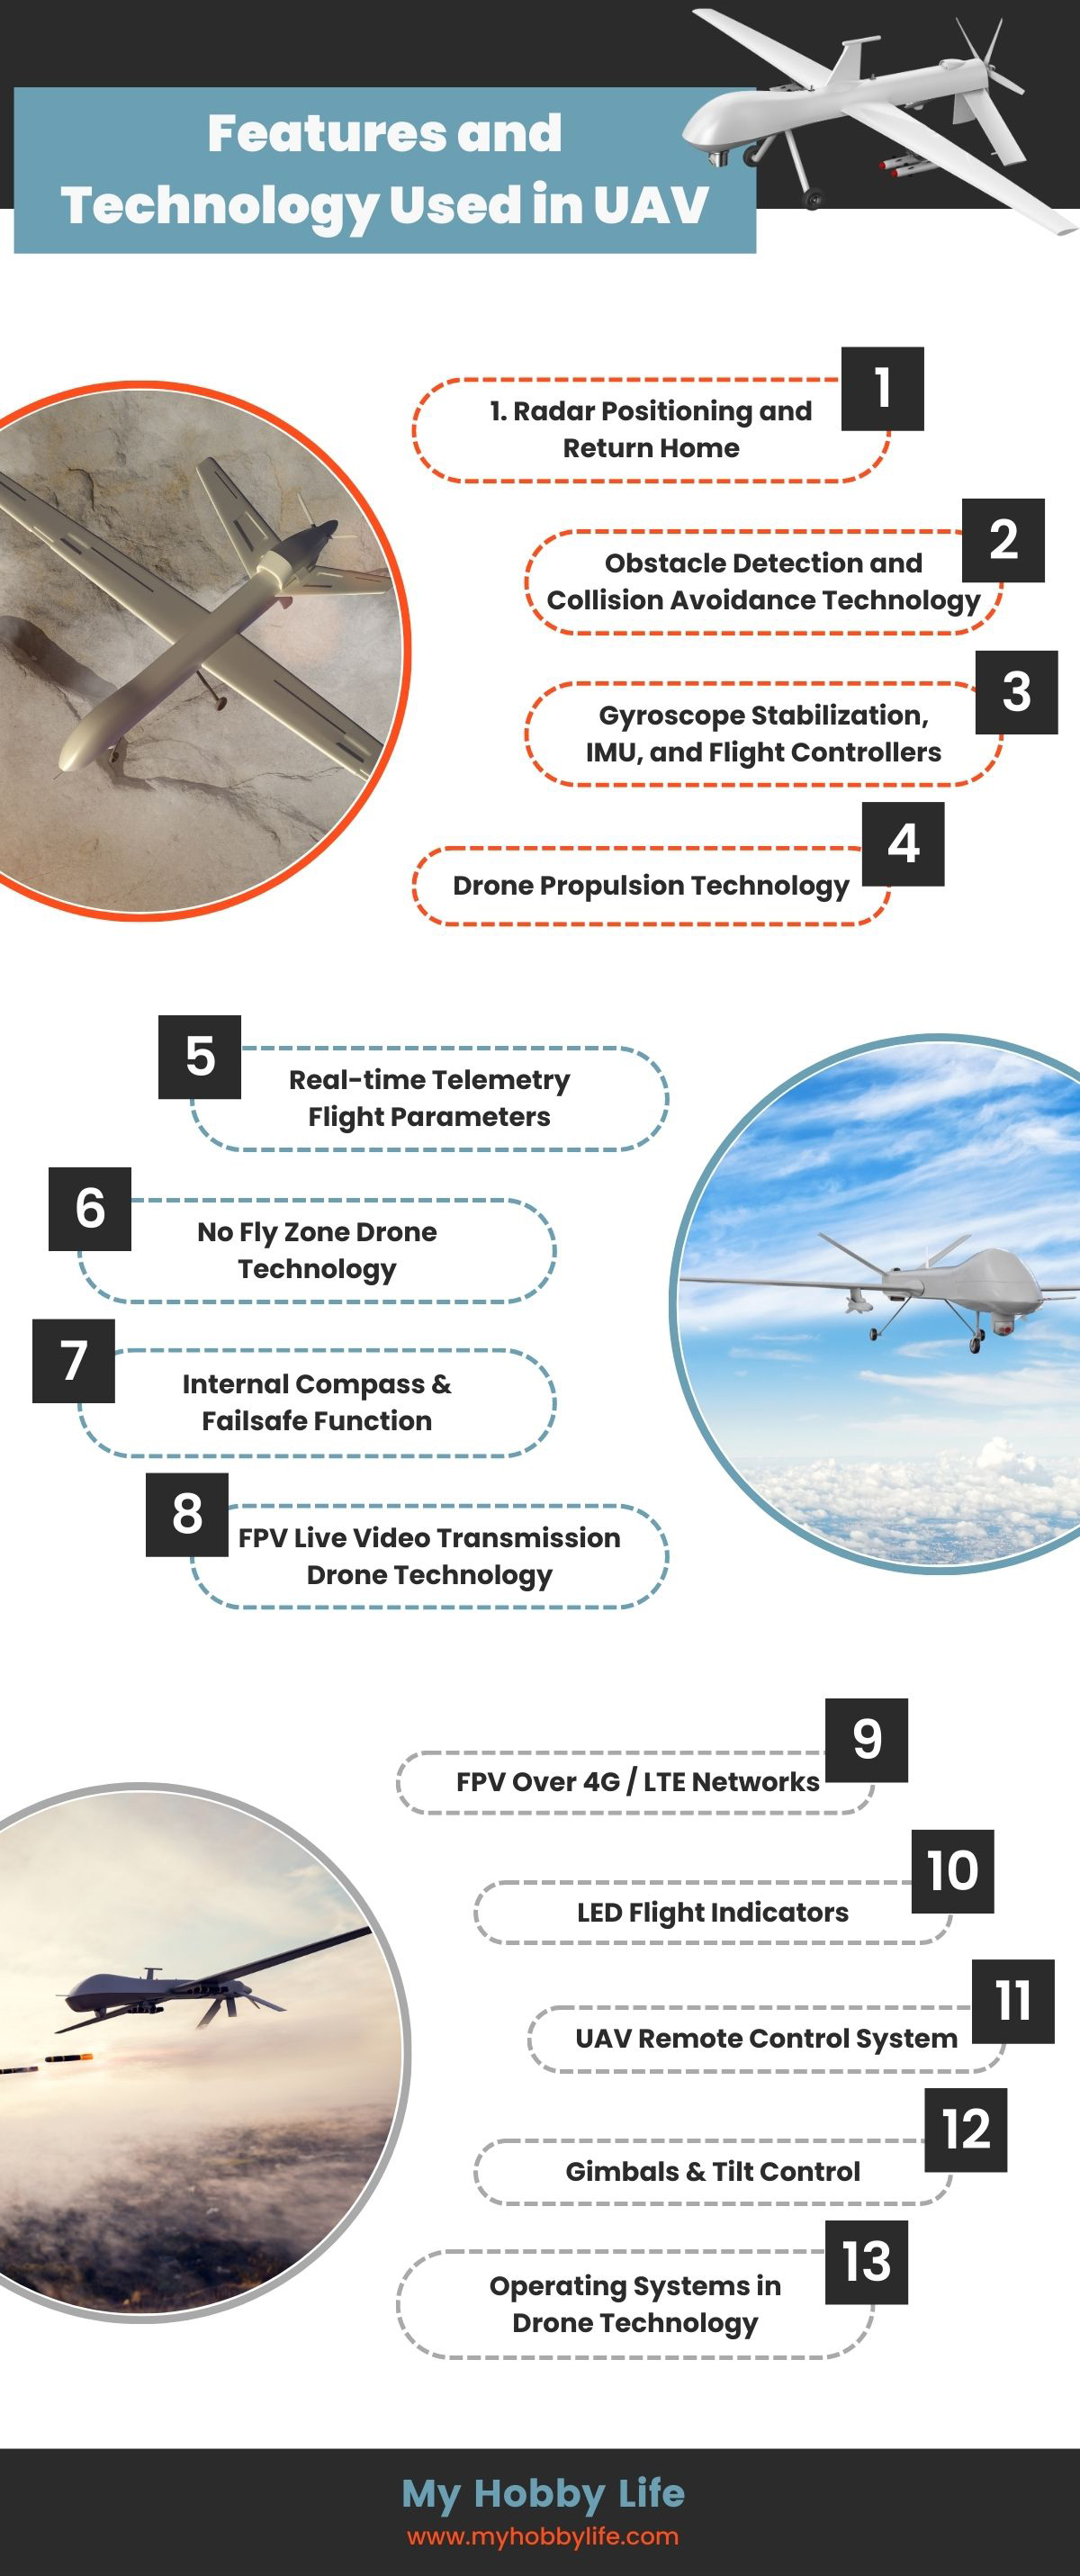 Features and Technology Used in UAV